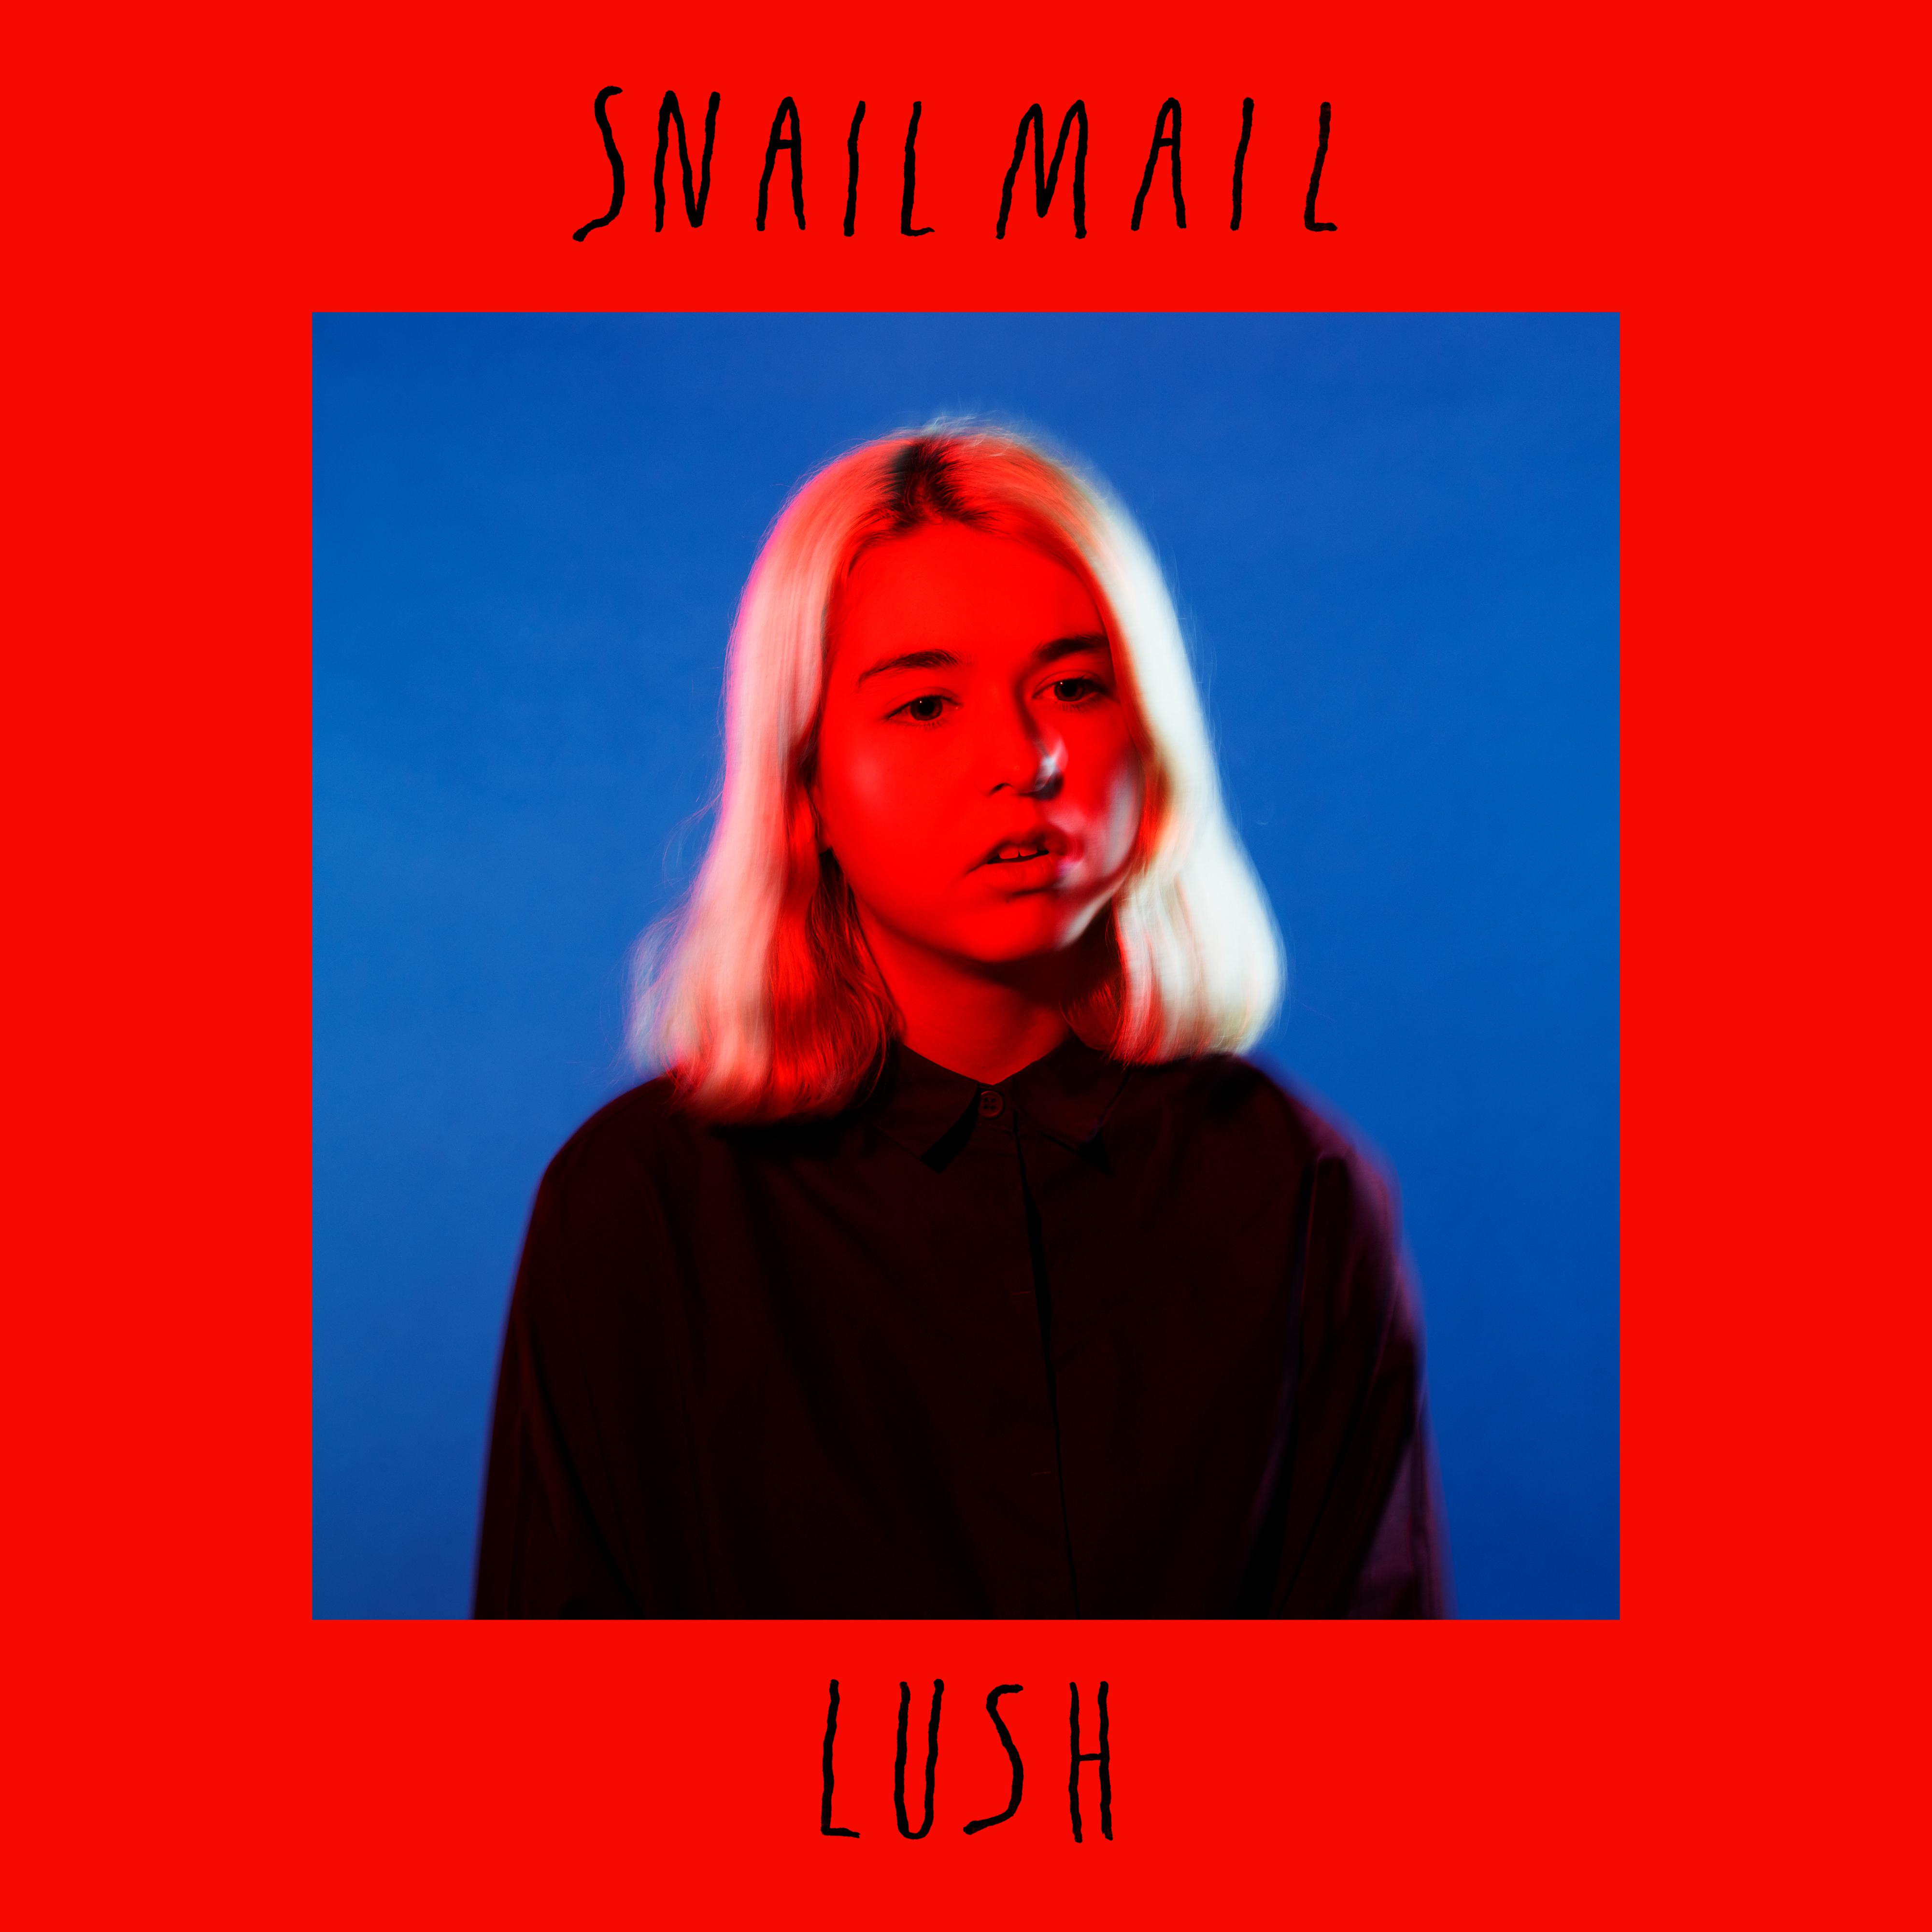 Speaking Terms歌词 歌手Snail Mail-专辑Lush-单曲《Speaking Terms》LRC歌词下载